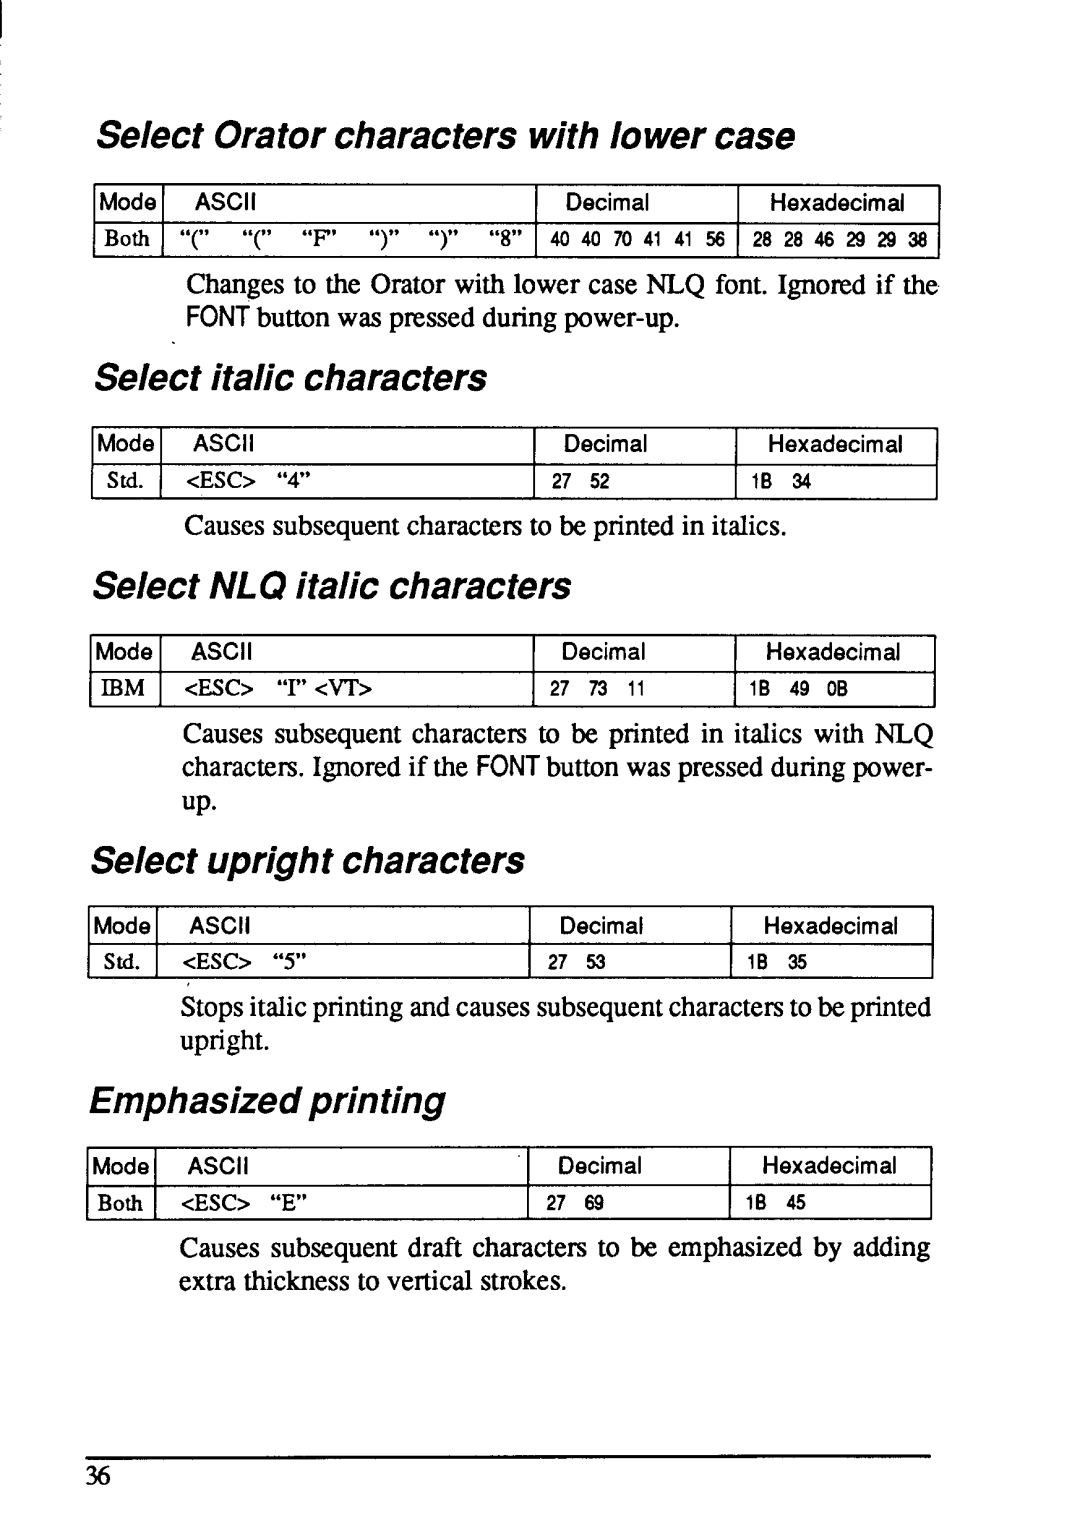 Star Micronics NX-1001 Select Oratorcharacterswith lower case, Select italic characters, Emphasizedprinting, IBM I Esc “ 